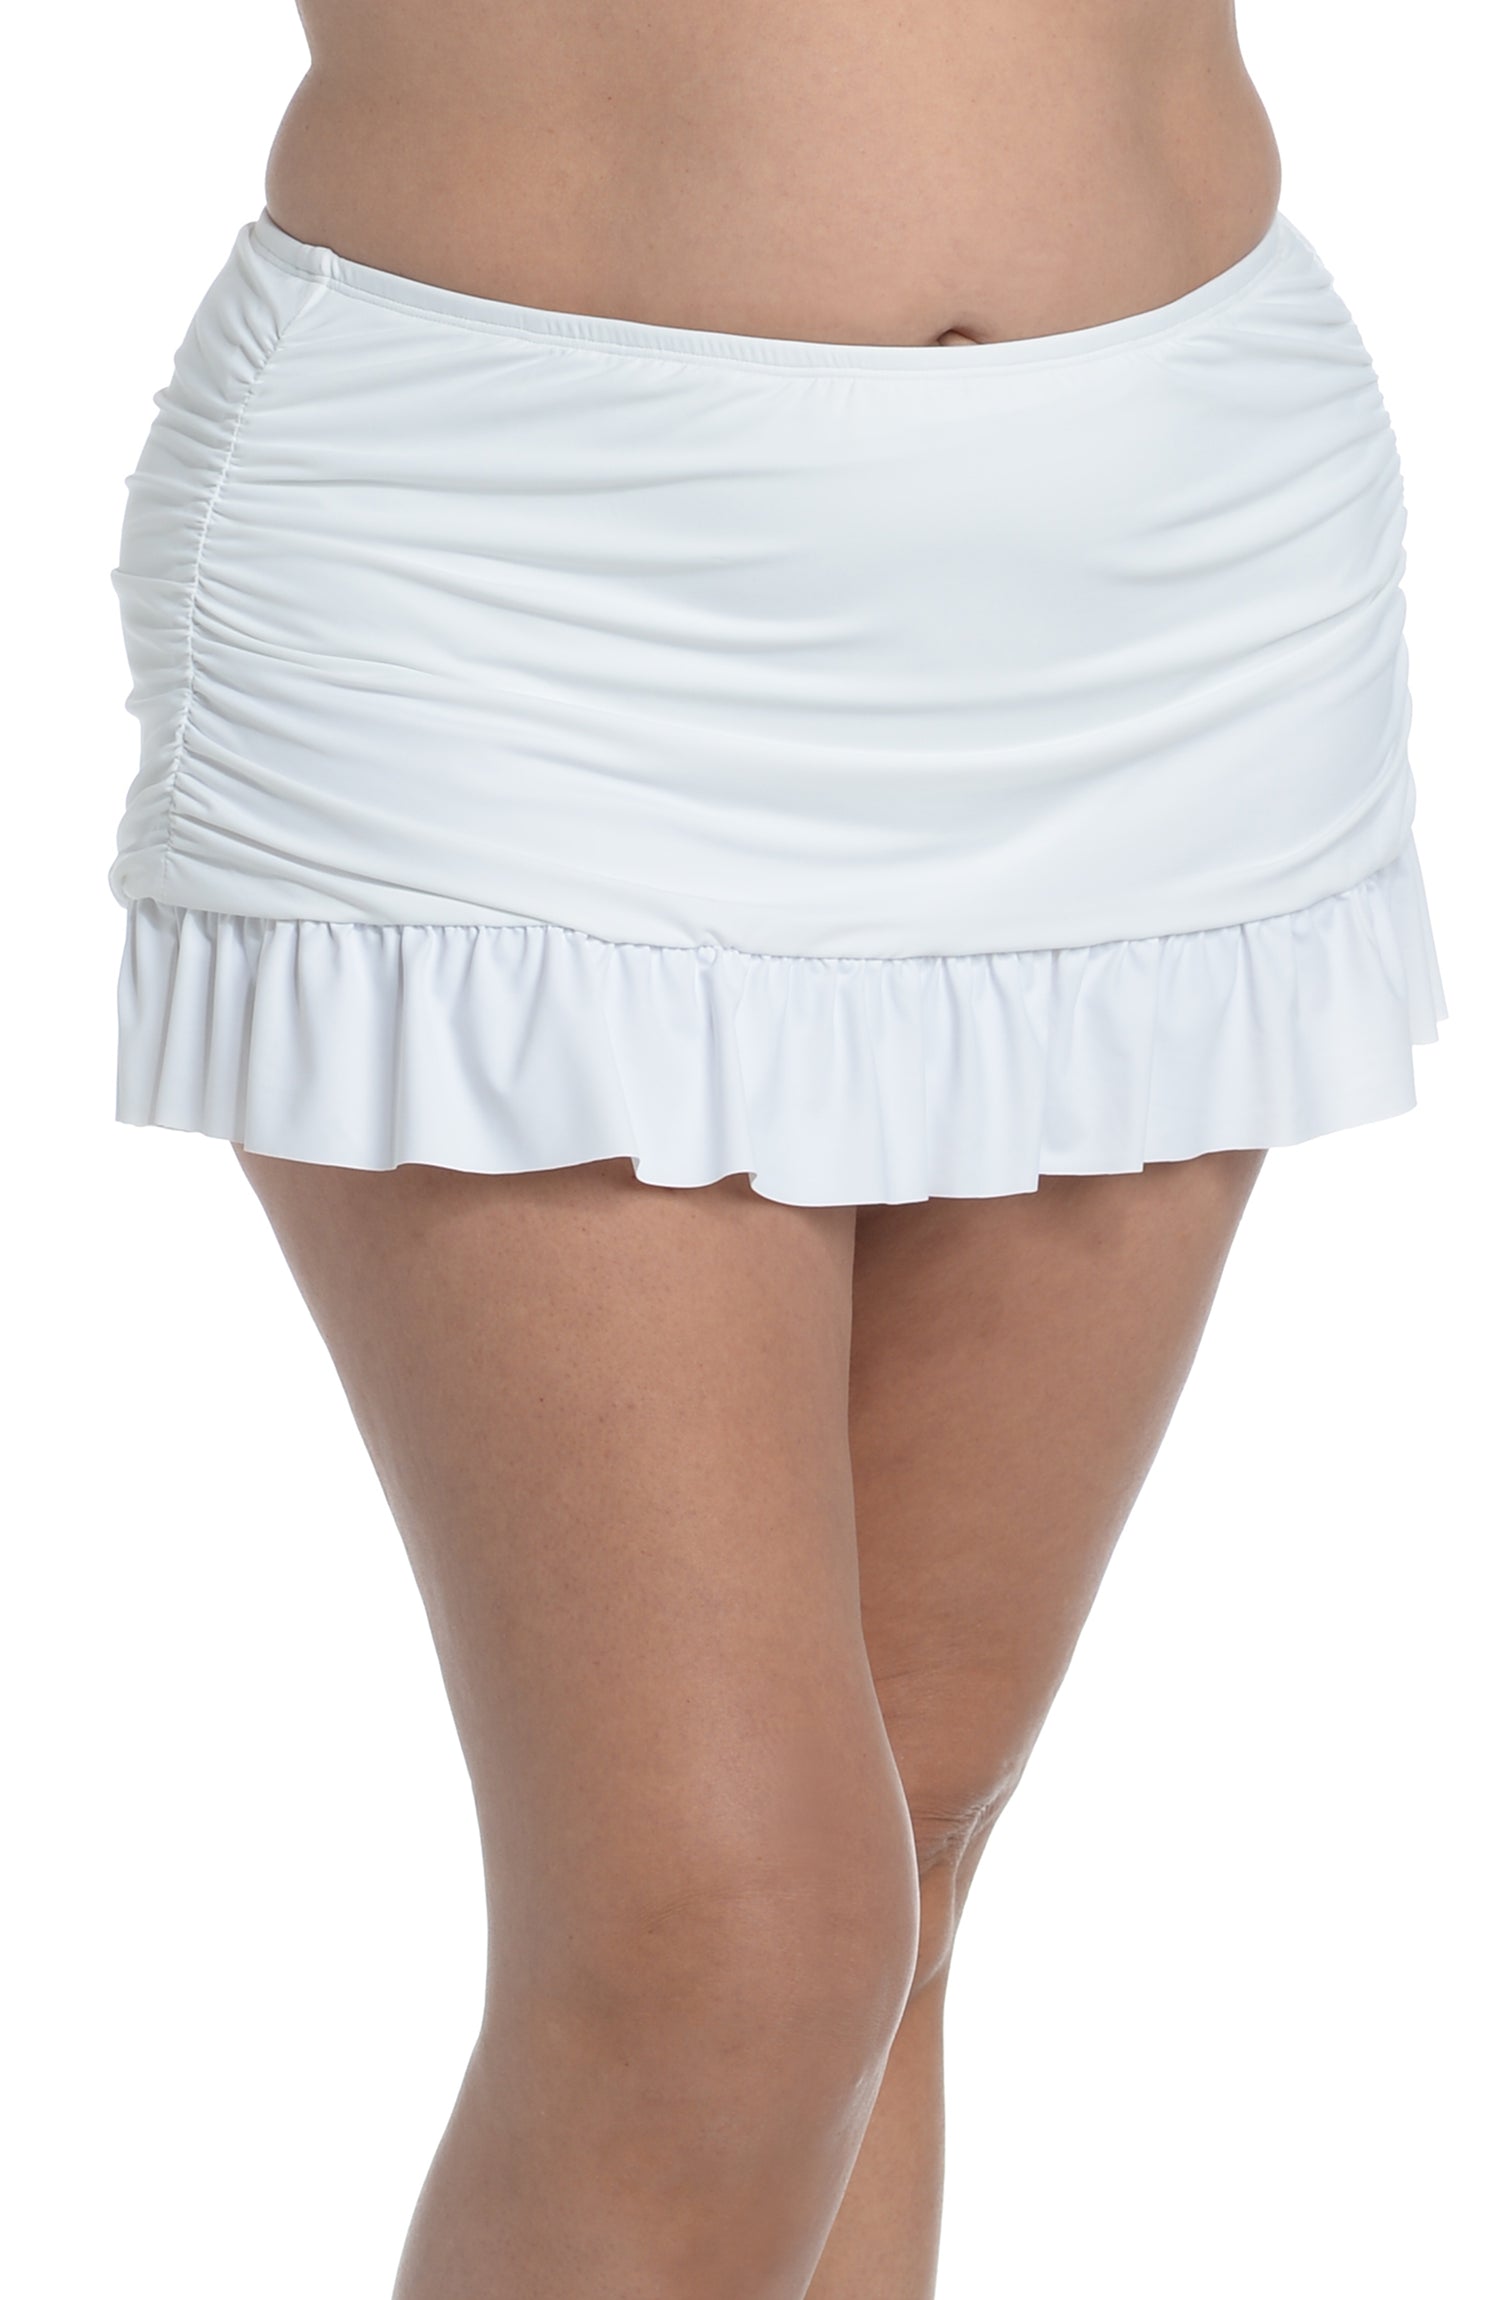 Model is wearing a white ruffle skirted swimsuit bottom from our Best-Selling Island Goddess collection.